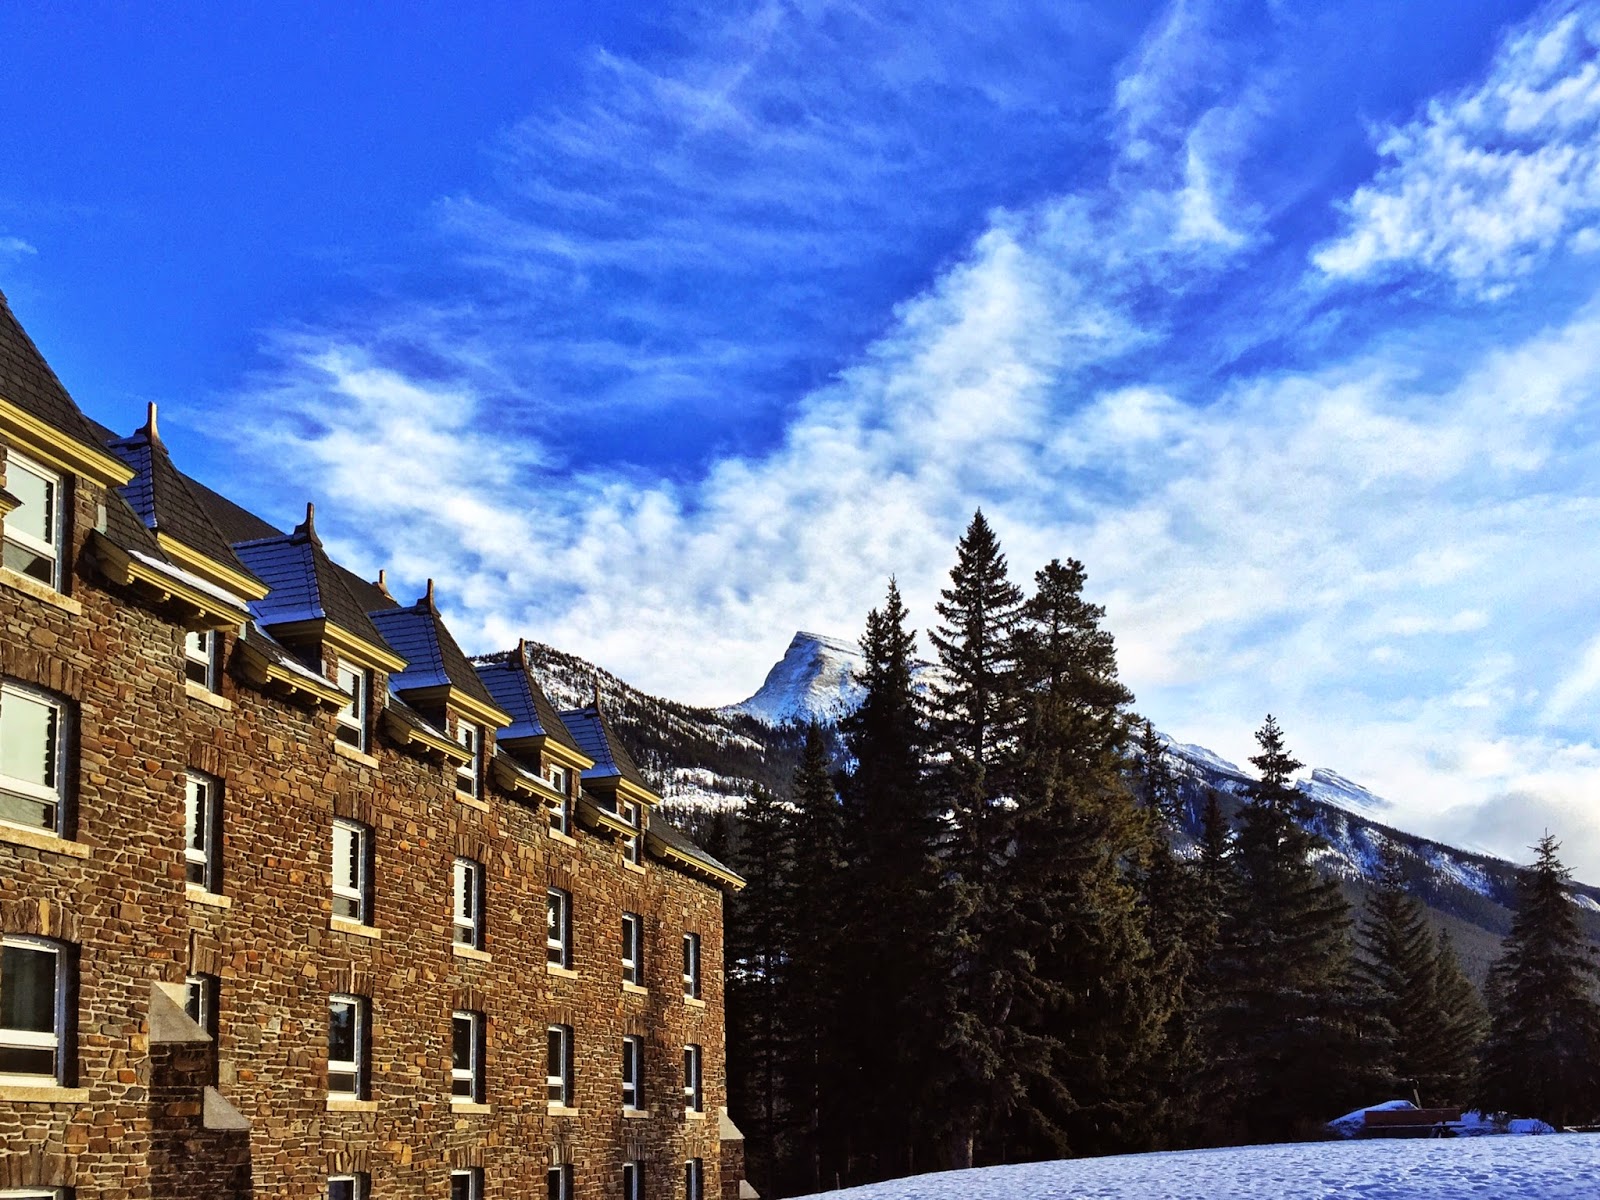 Fairmont Banff Springs in Alberta Canada by Jessica Mack, SweetDivergence